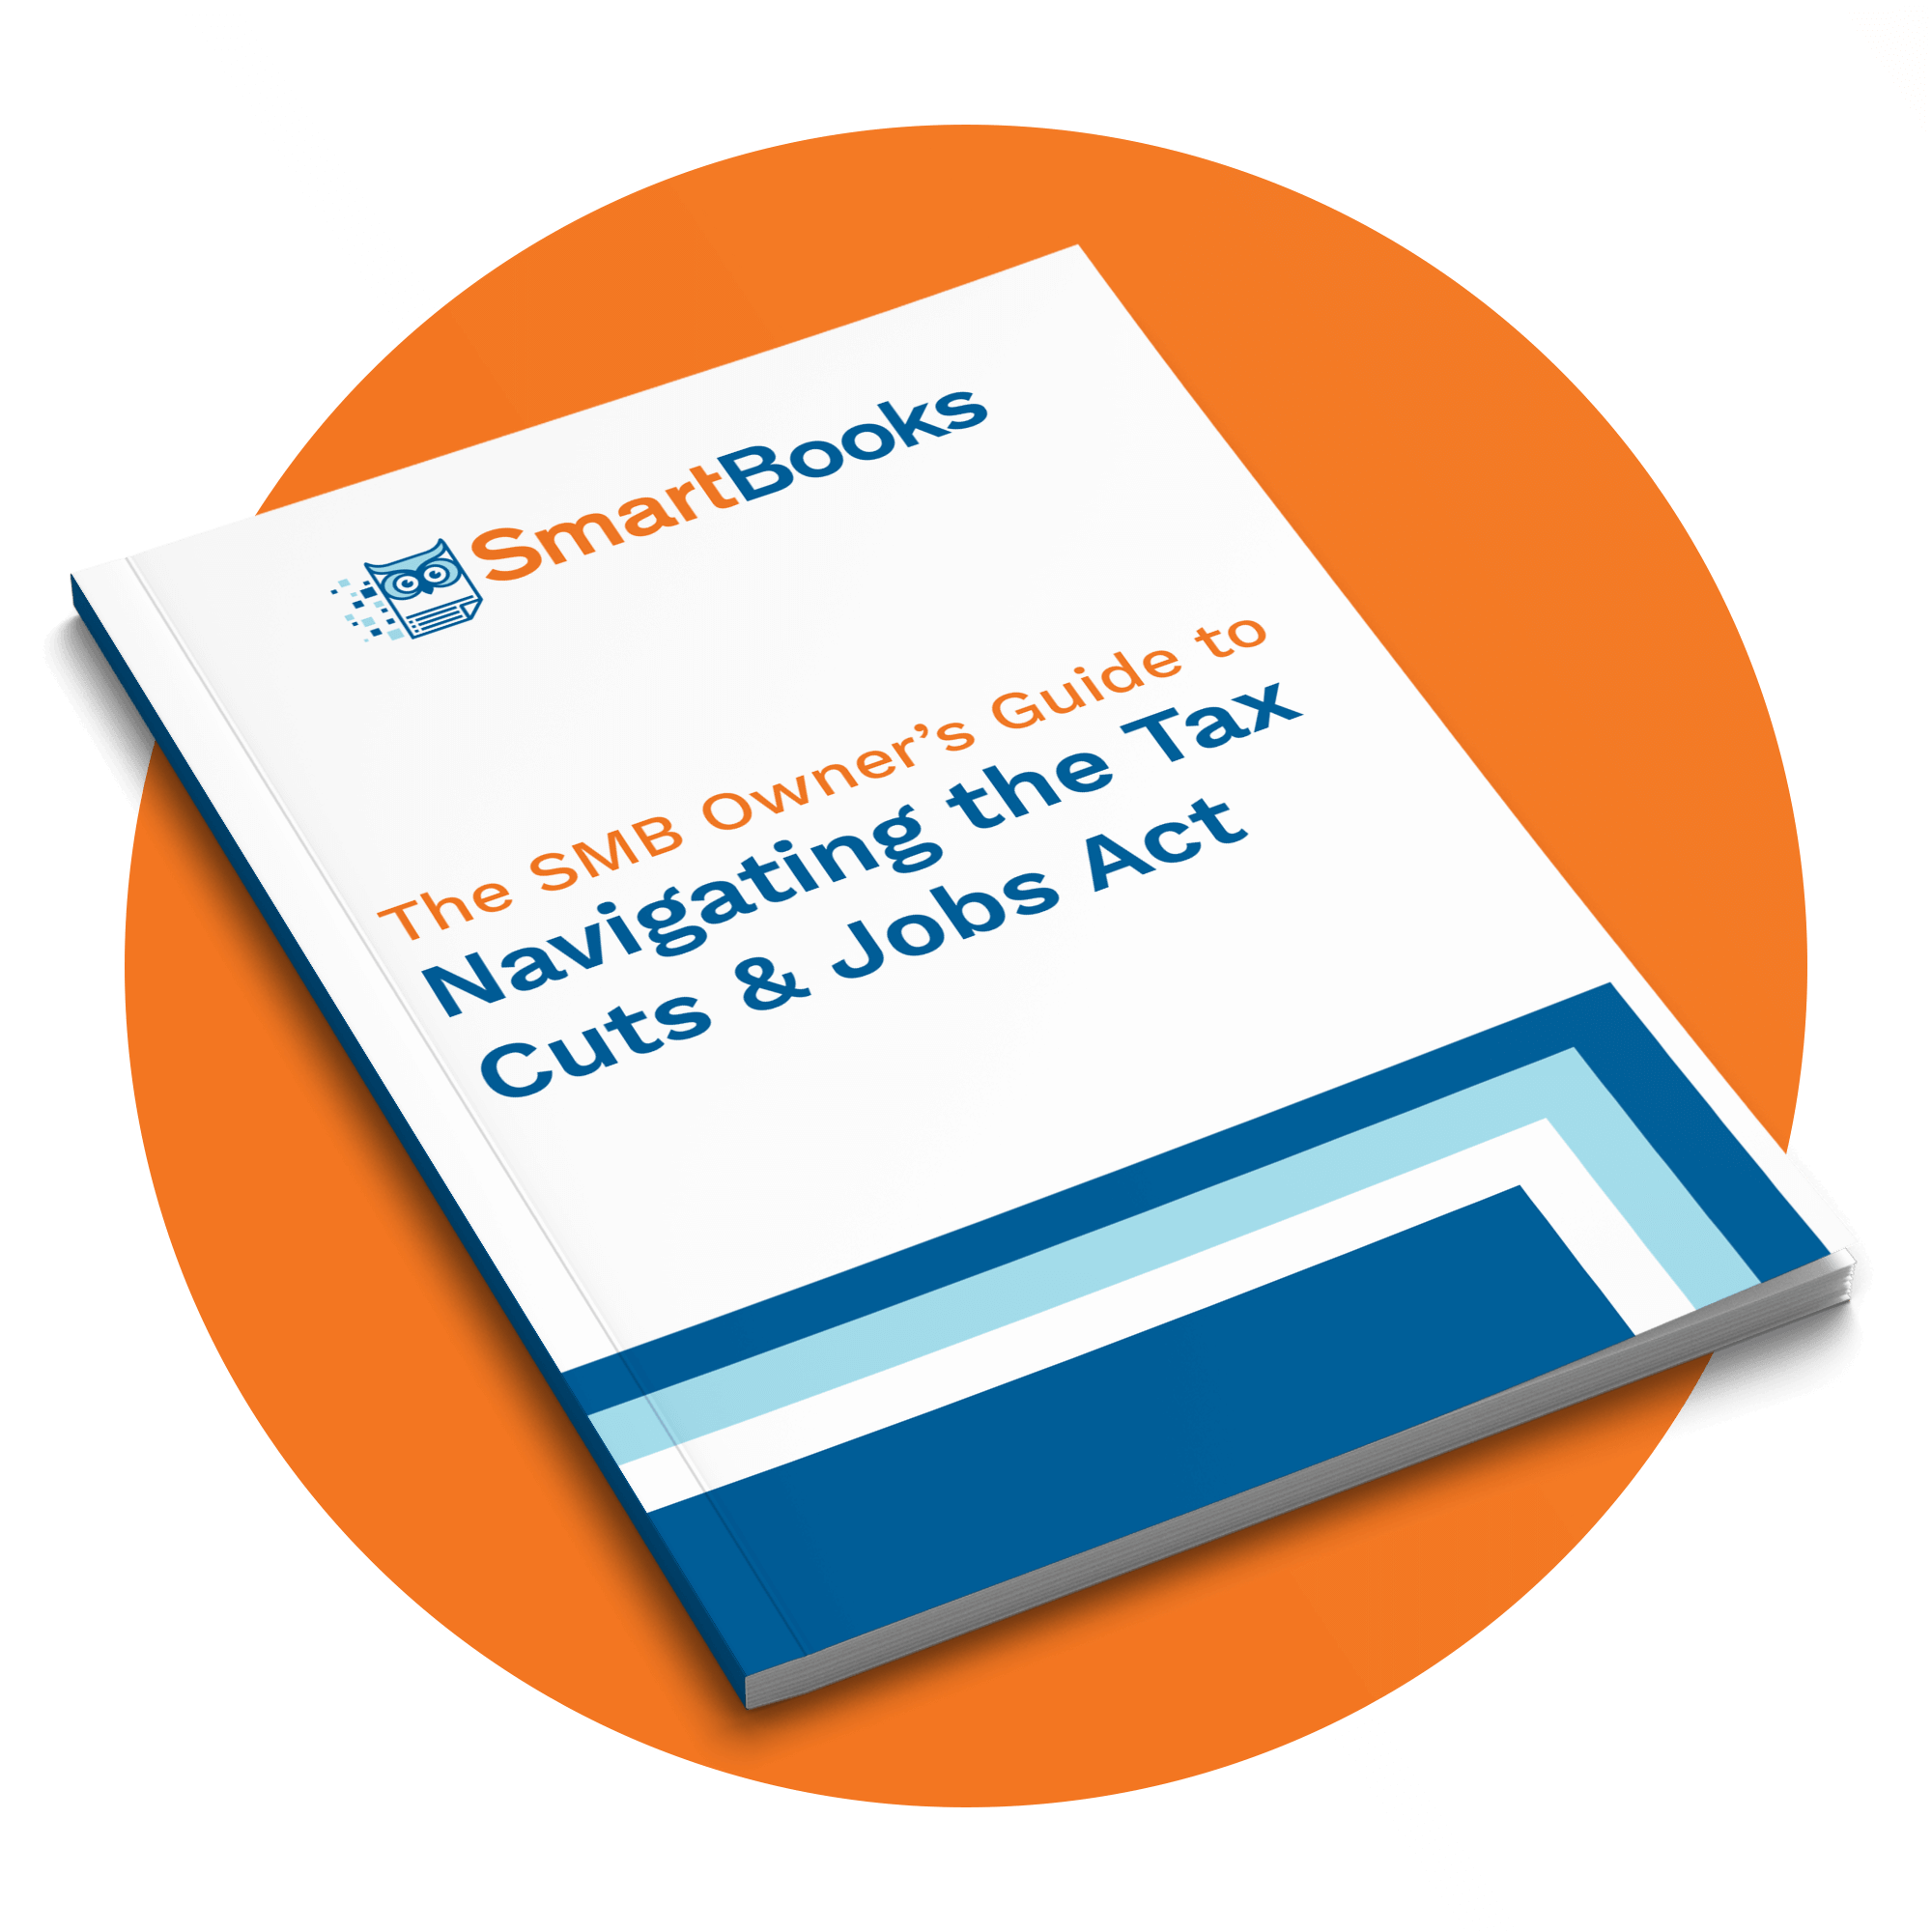 The Small Business Owner’s Guide to Navigating the Tax Cuts & Jobs Act